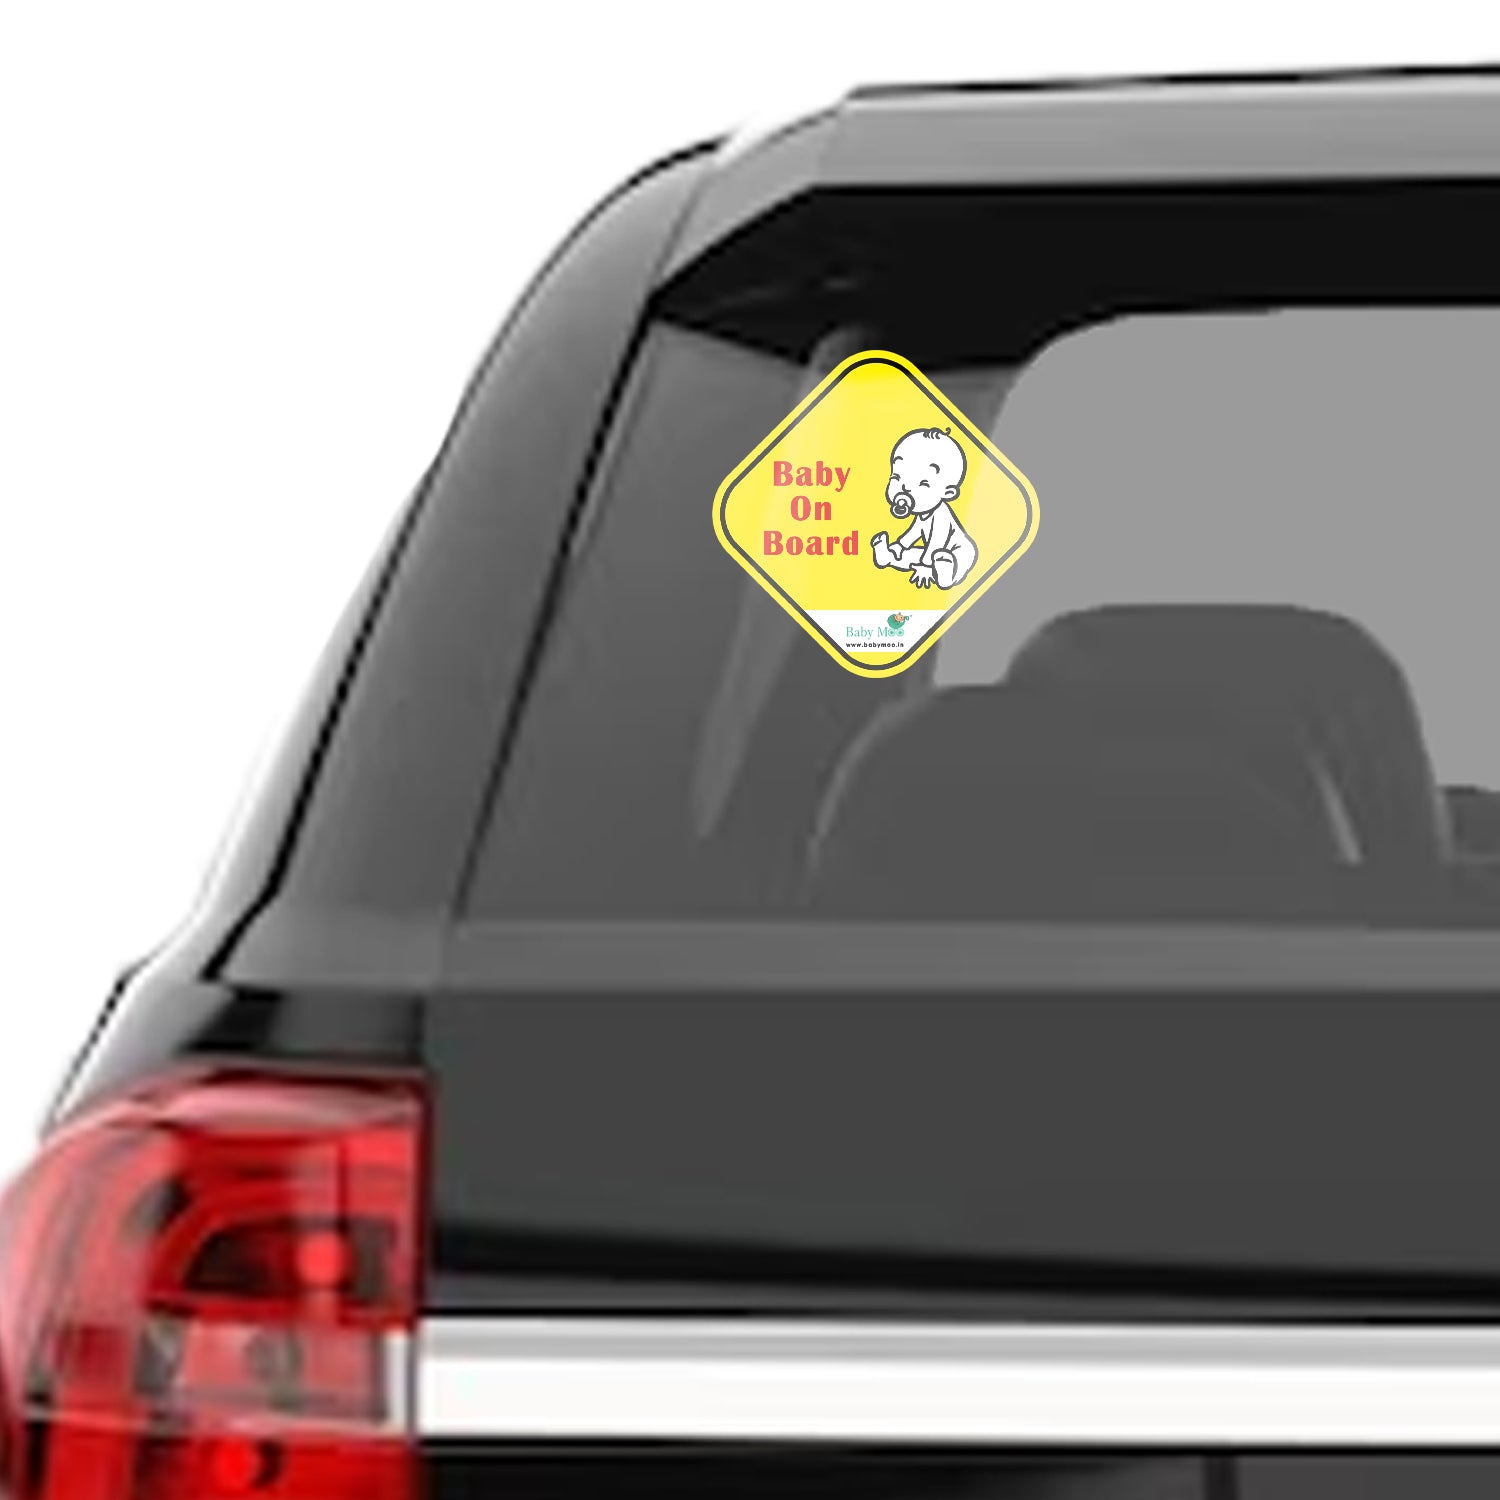 Baby Moo Car Safety Sign Little Baby On Board With Vacuum Suction Cup Clip - Yellow - Baby Moo